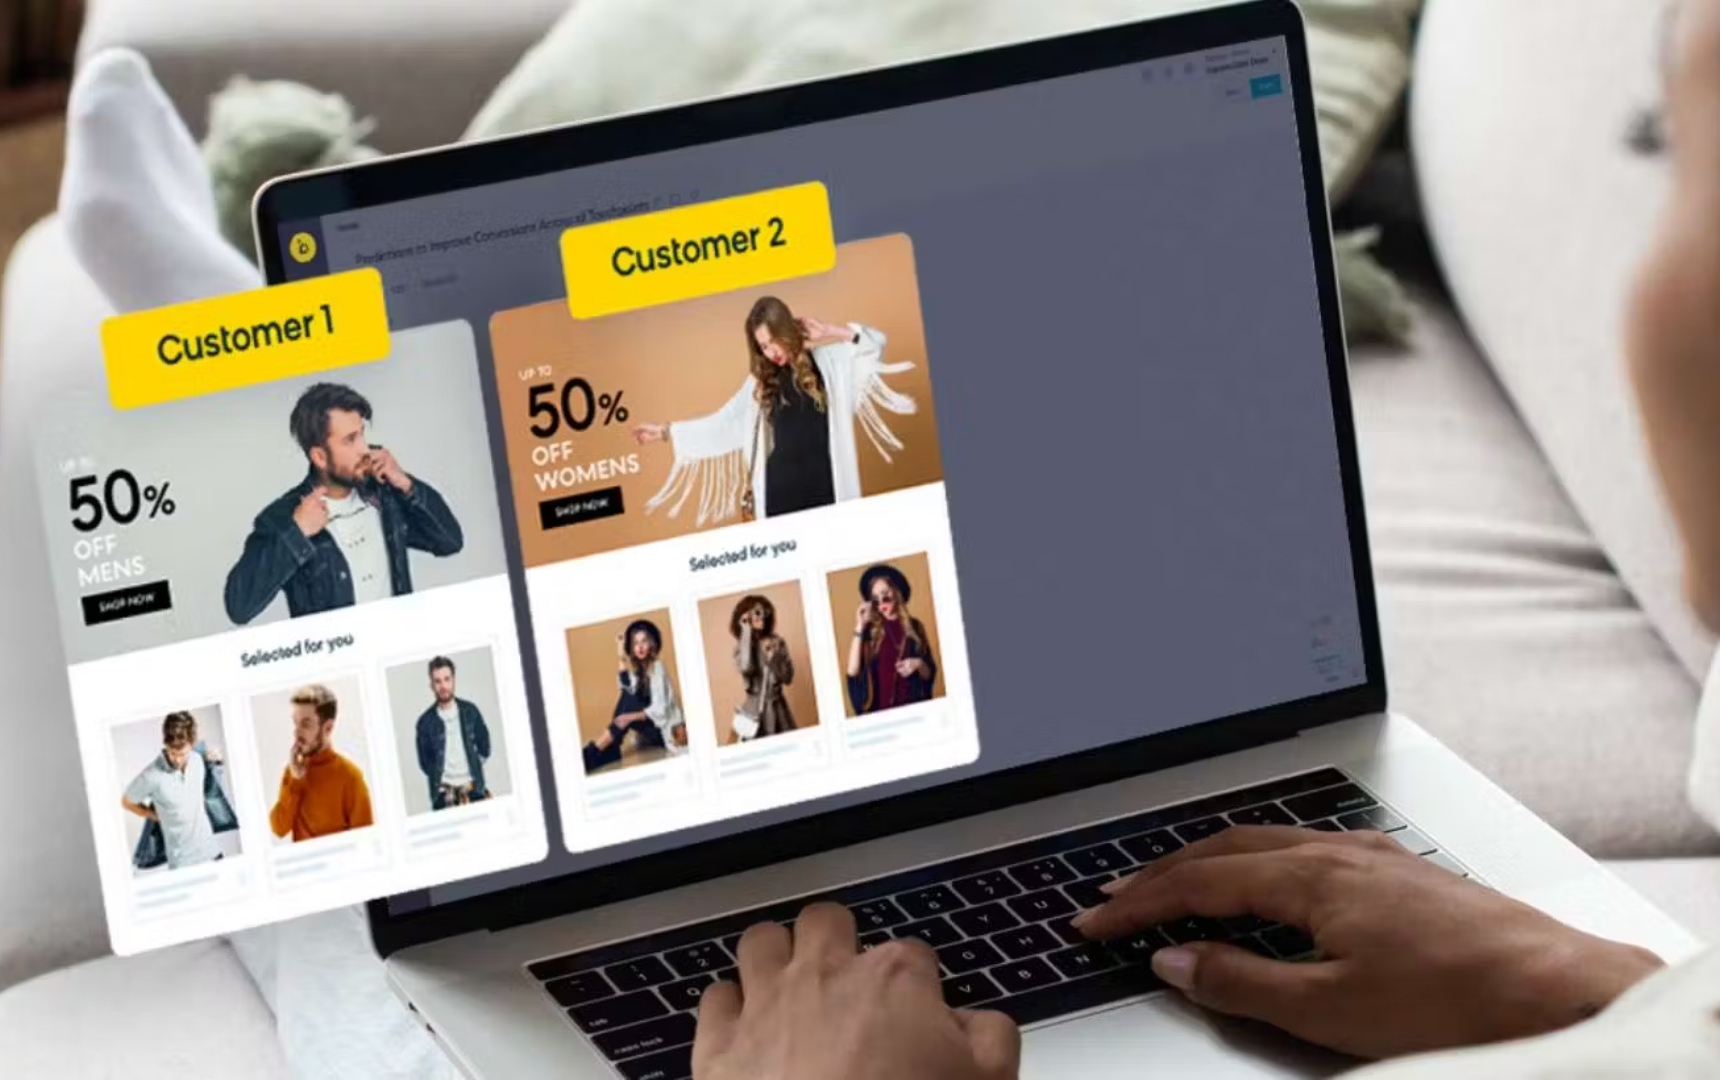 Dynamic content personalization, which offers unique customer experiences based on each website visitor's actions and behavior